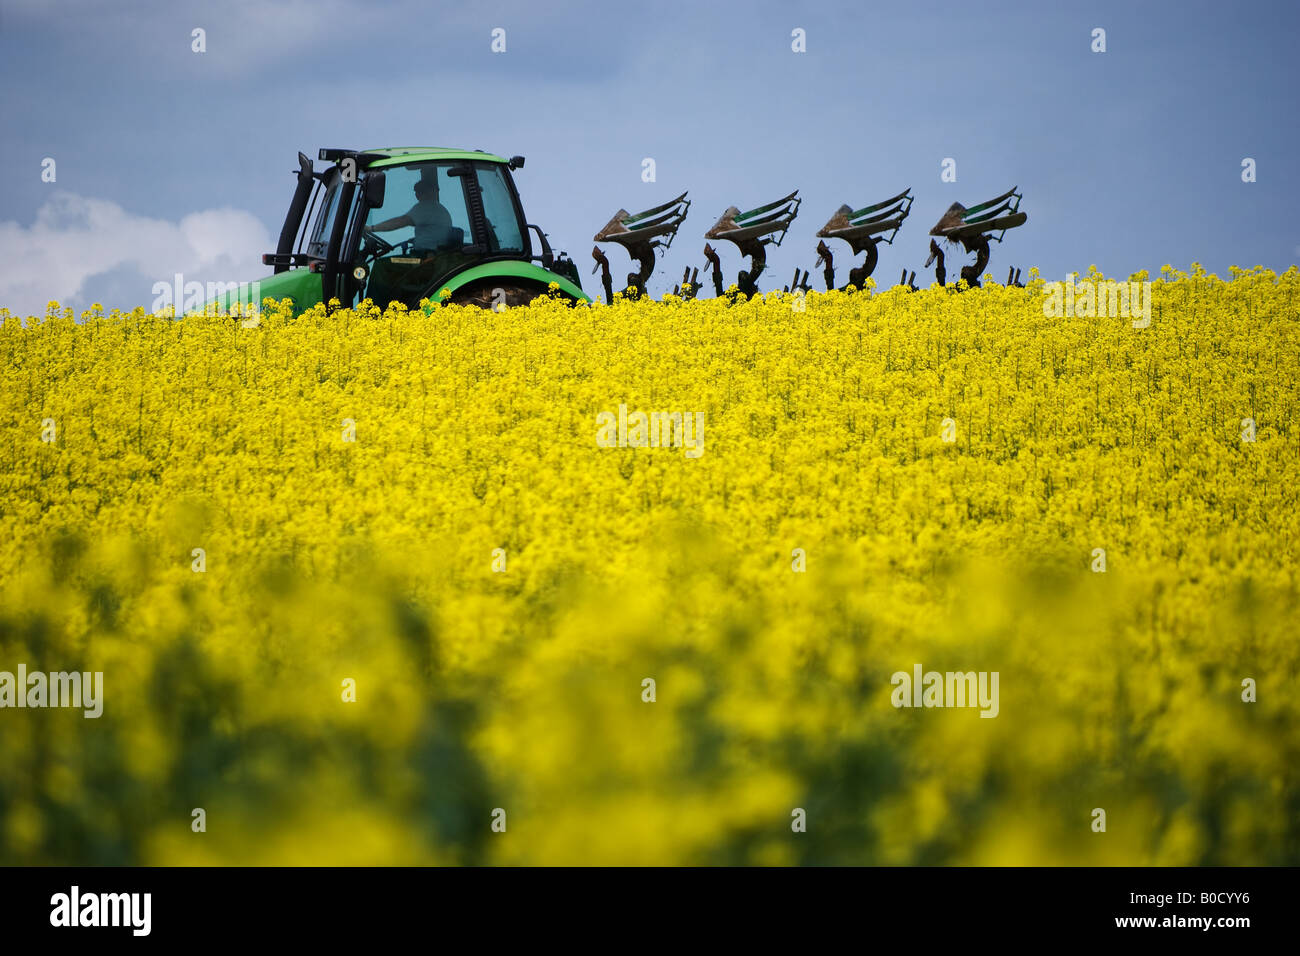 Farm tractor in a field harvesting rapeseed by Charles W. Lupica Stock Photo